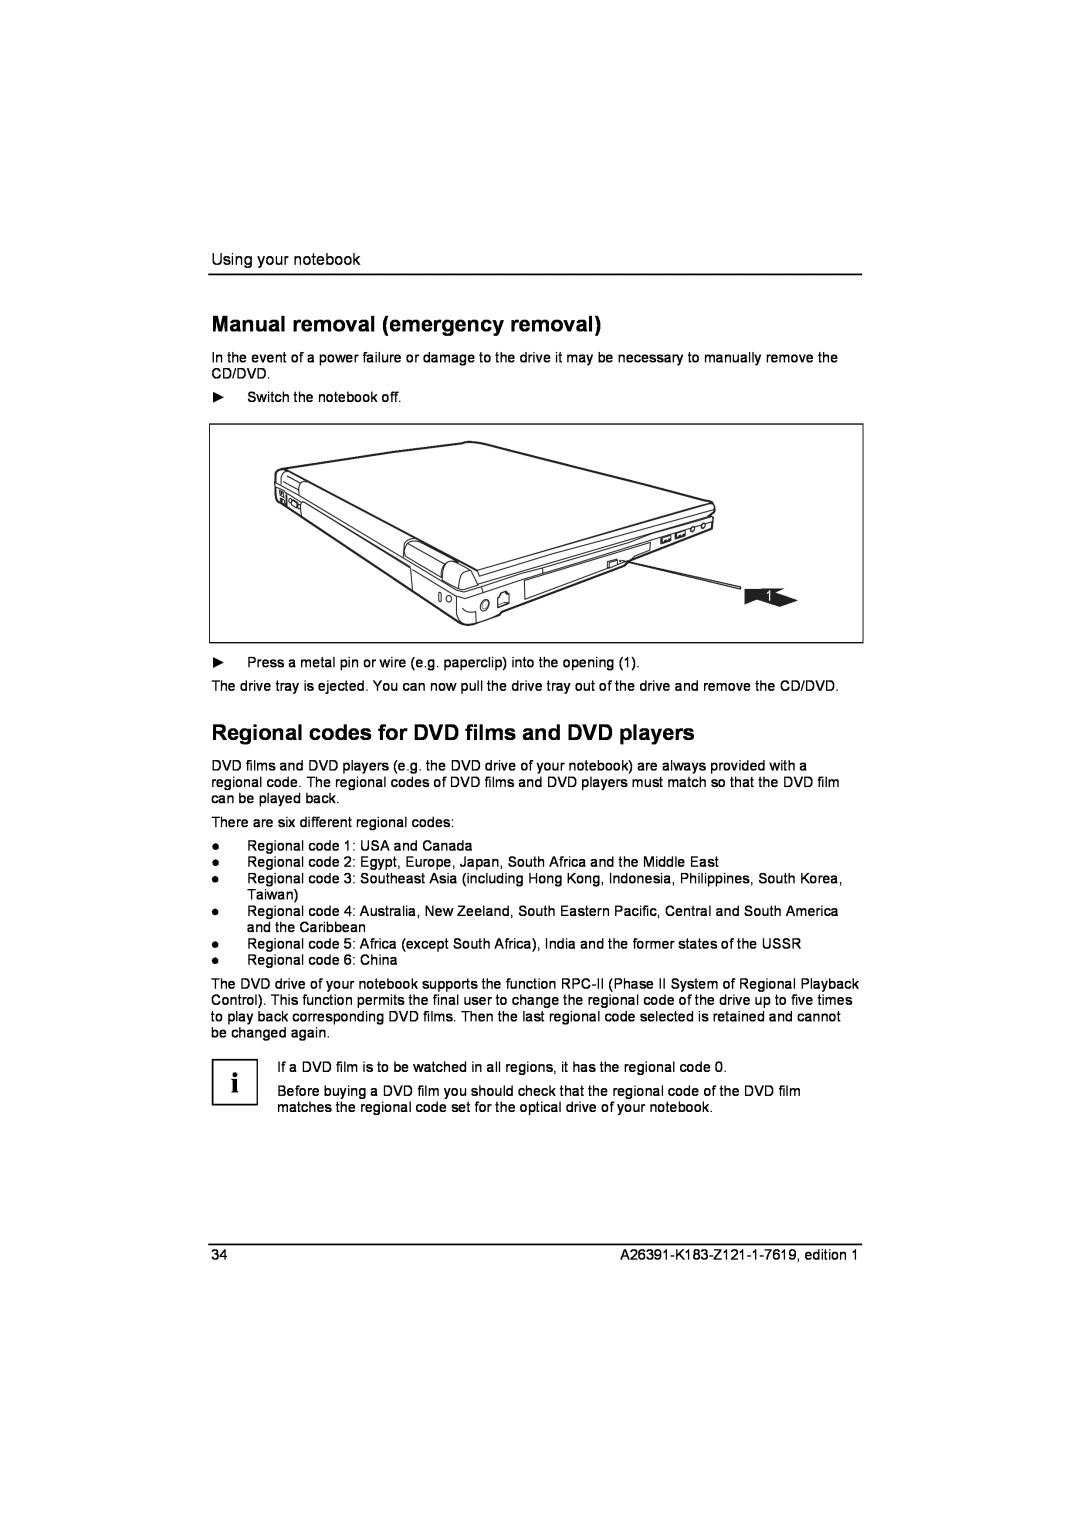 Fujitsu Siemens Computers V2035 manual Manual removal emergency removal, Regional codes for DVD films and DVD players 